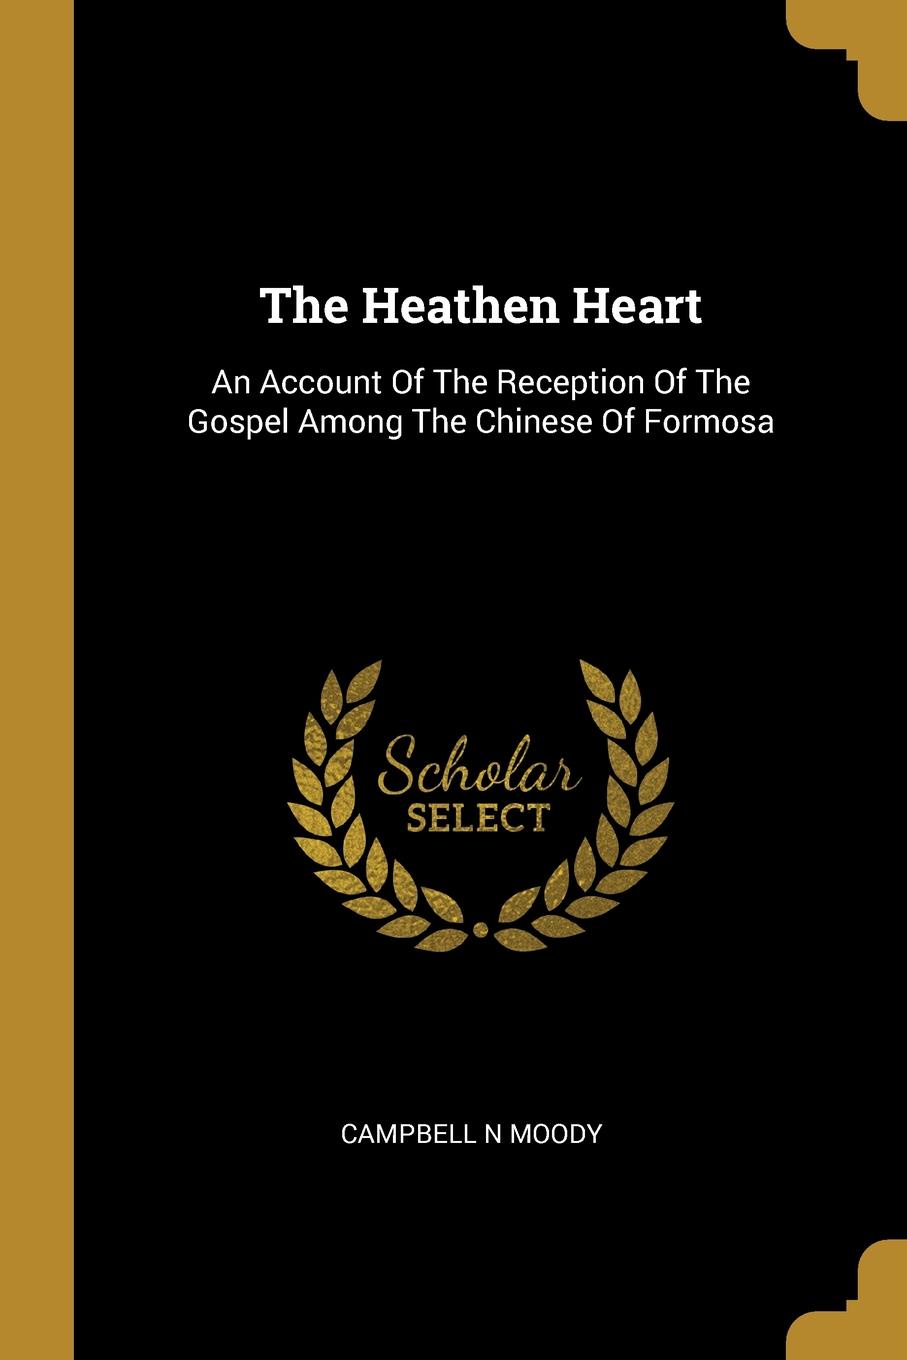 The Heathen Heart. An Account Of The Reception Of The Gospel Among The Chinese Of Formosa